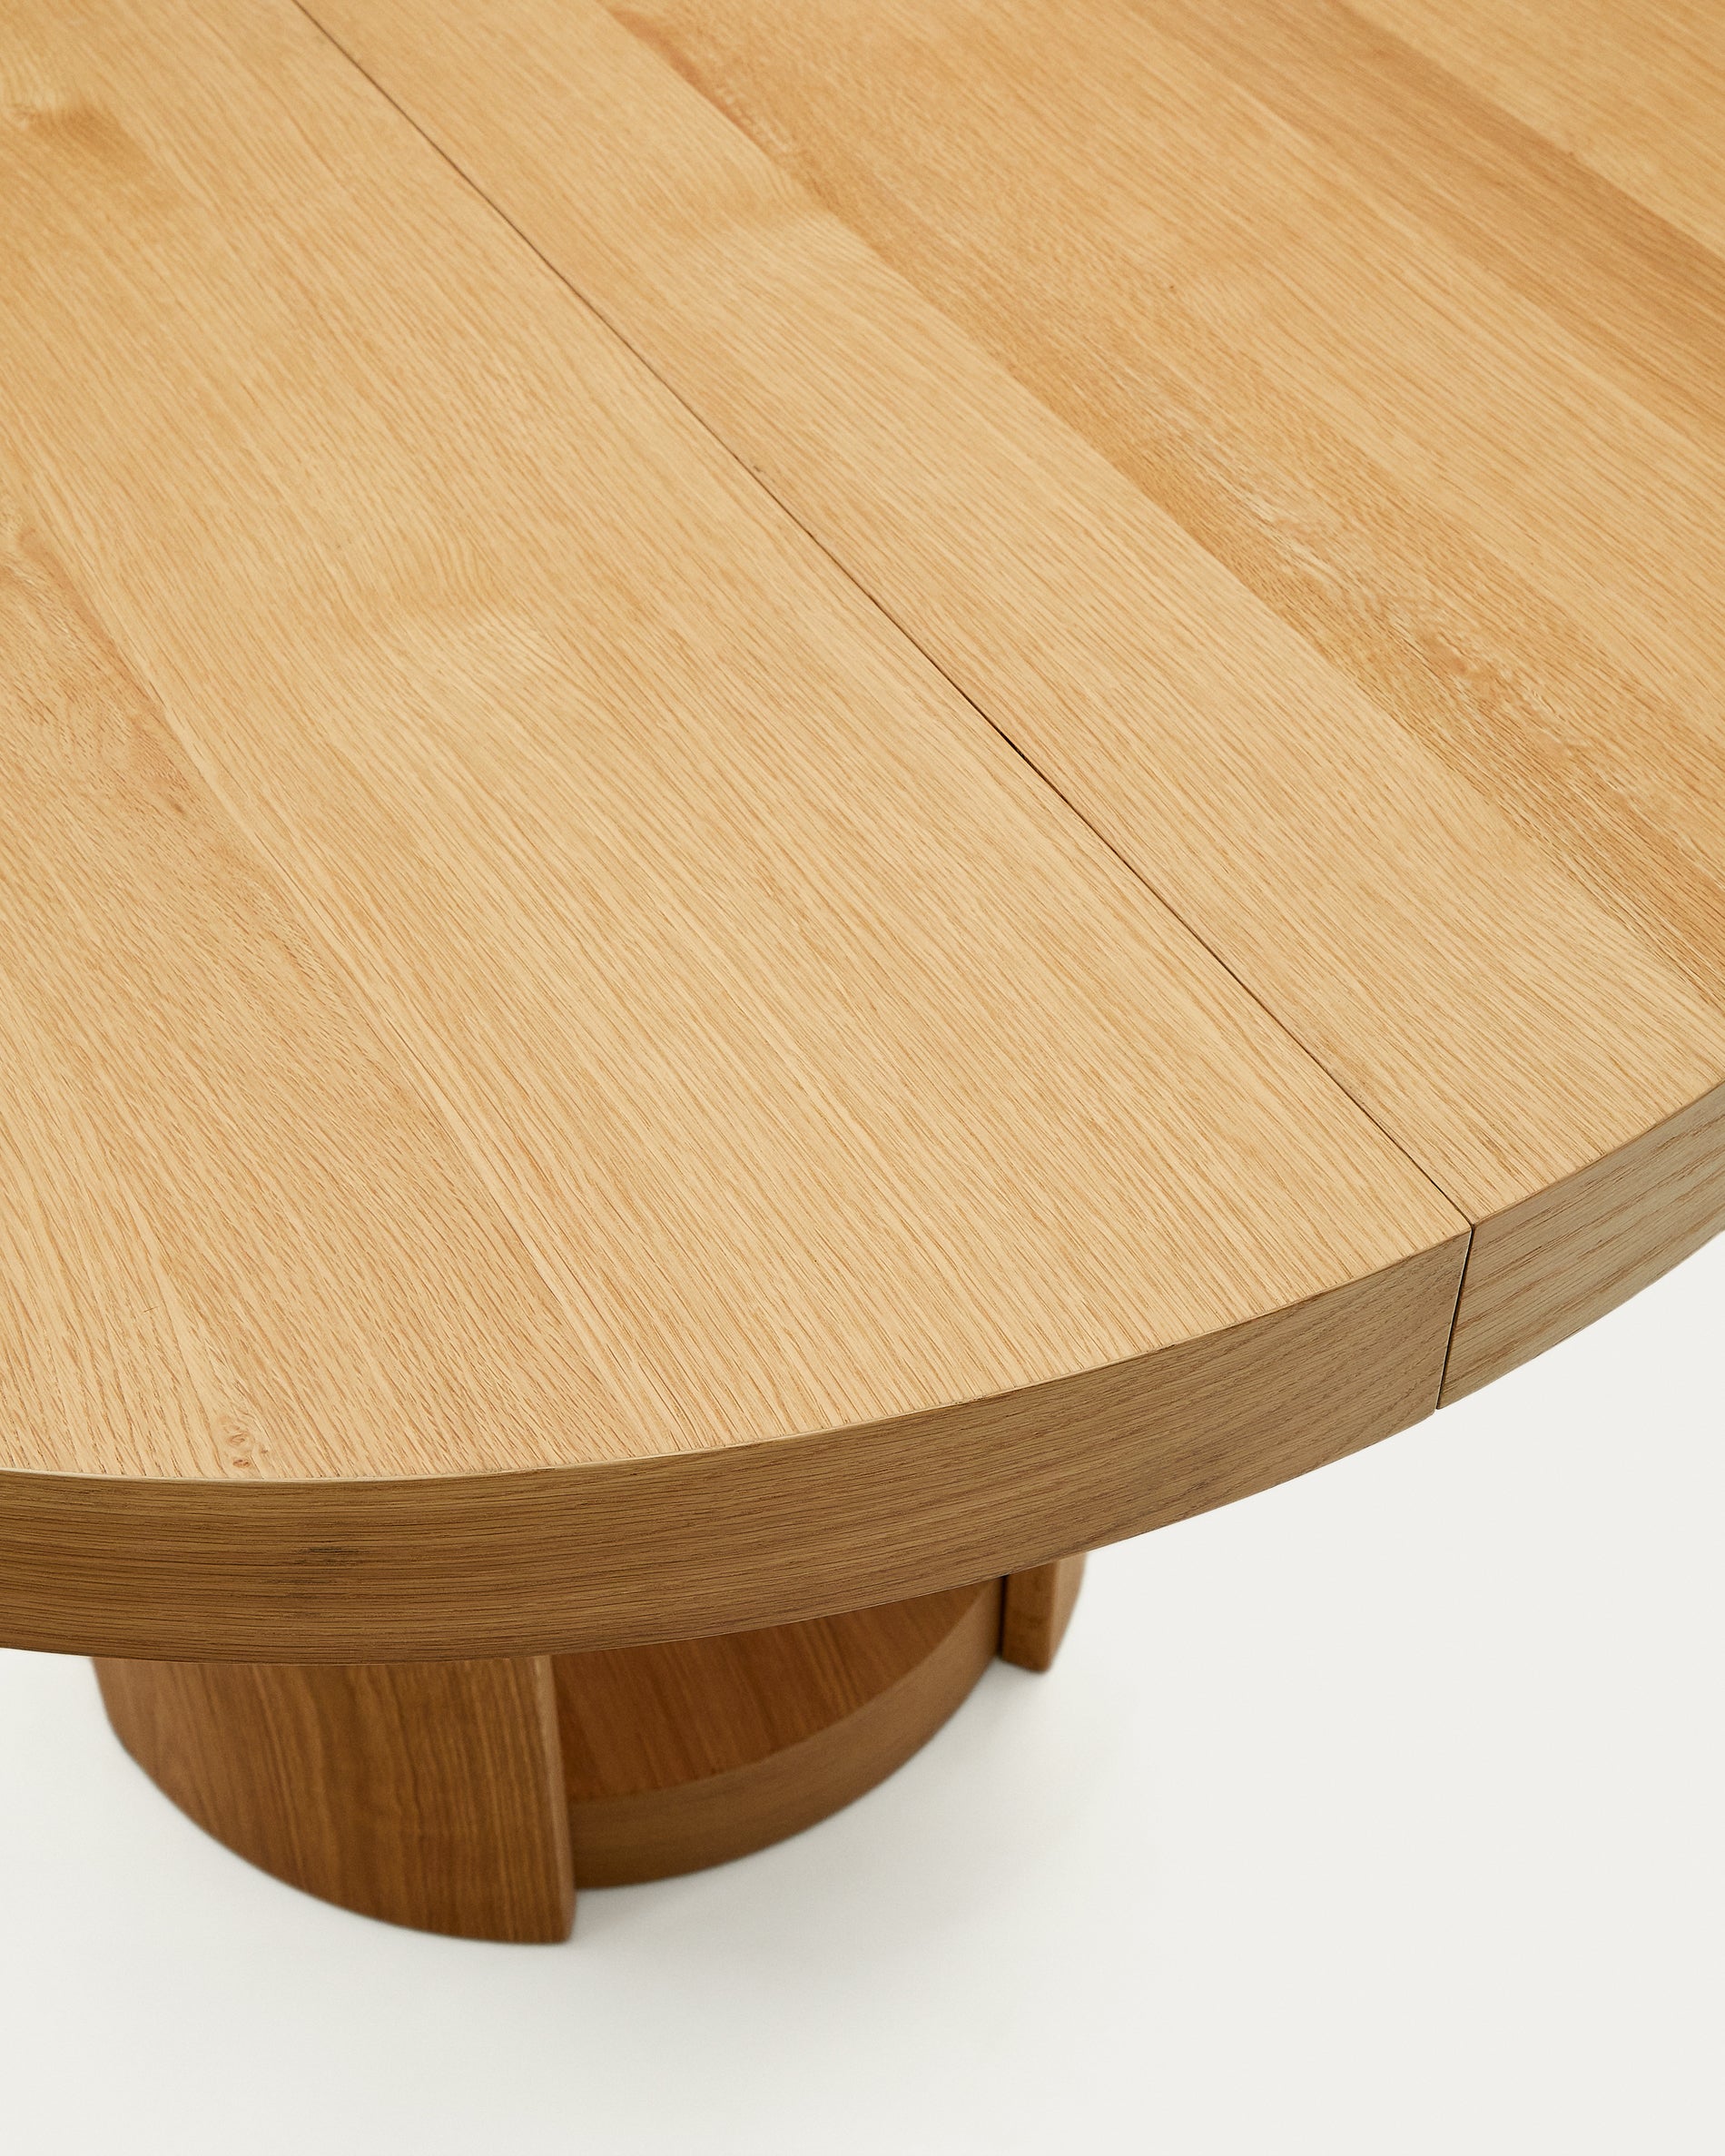 Artis extendable round table in solid oak and veneer, 100% FSC, 150 (200) cm x 80 cm